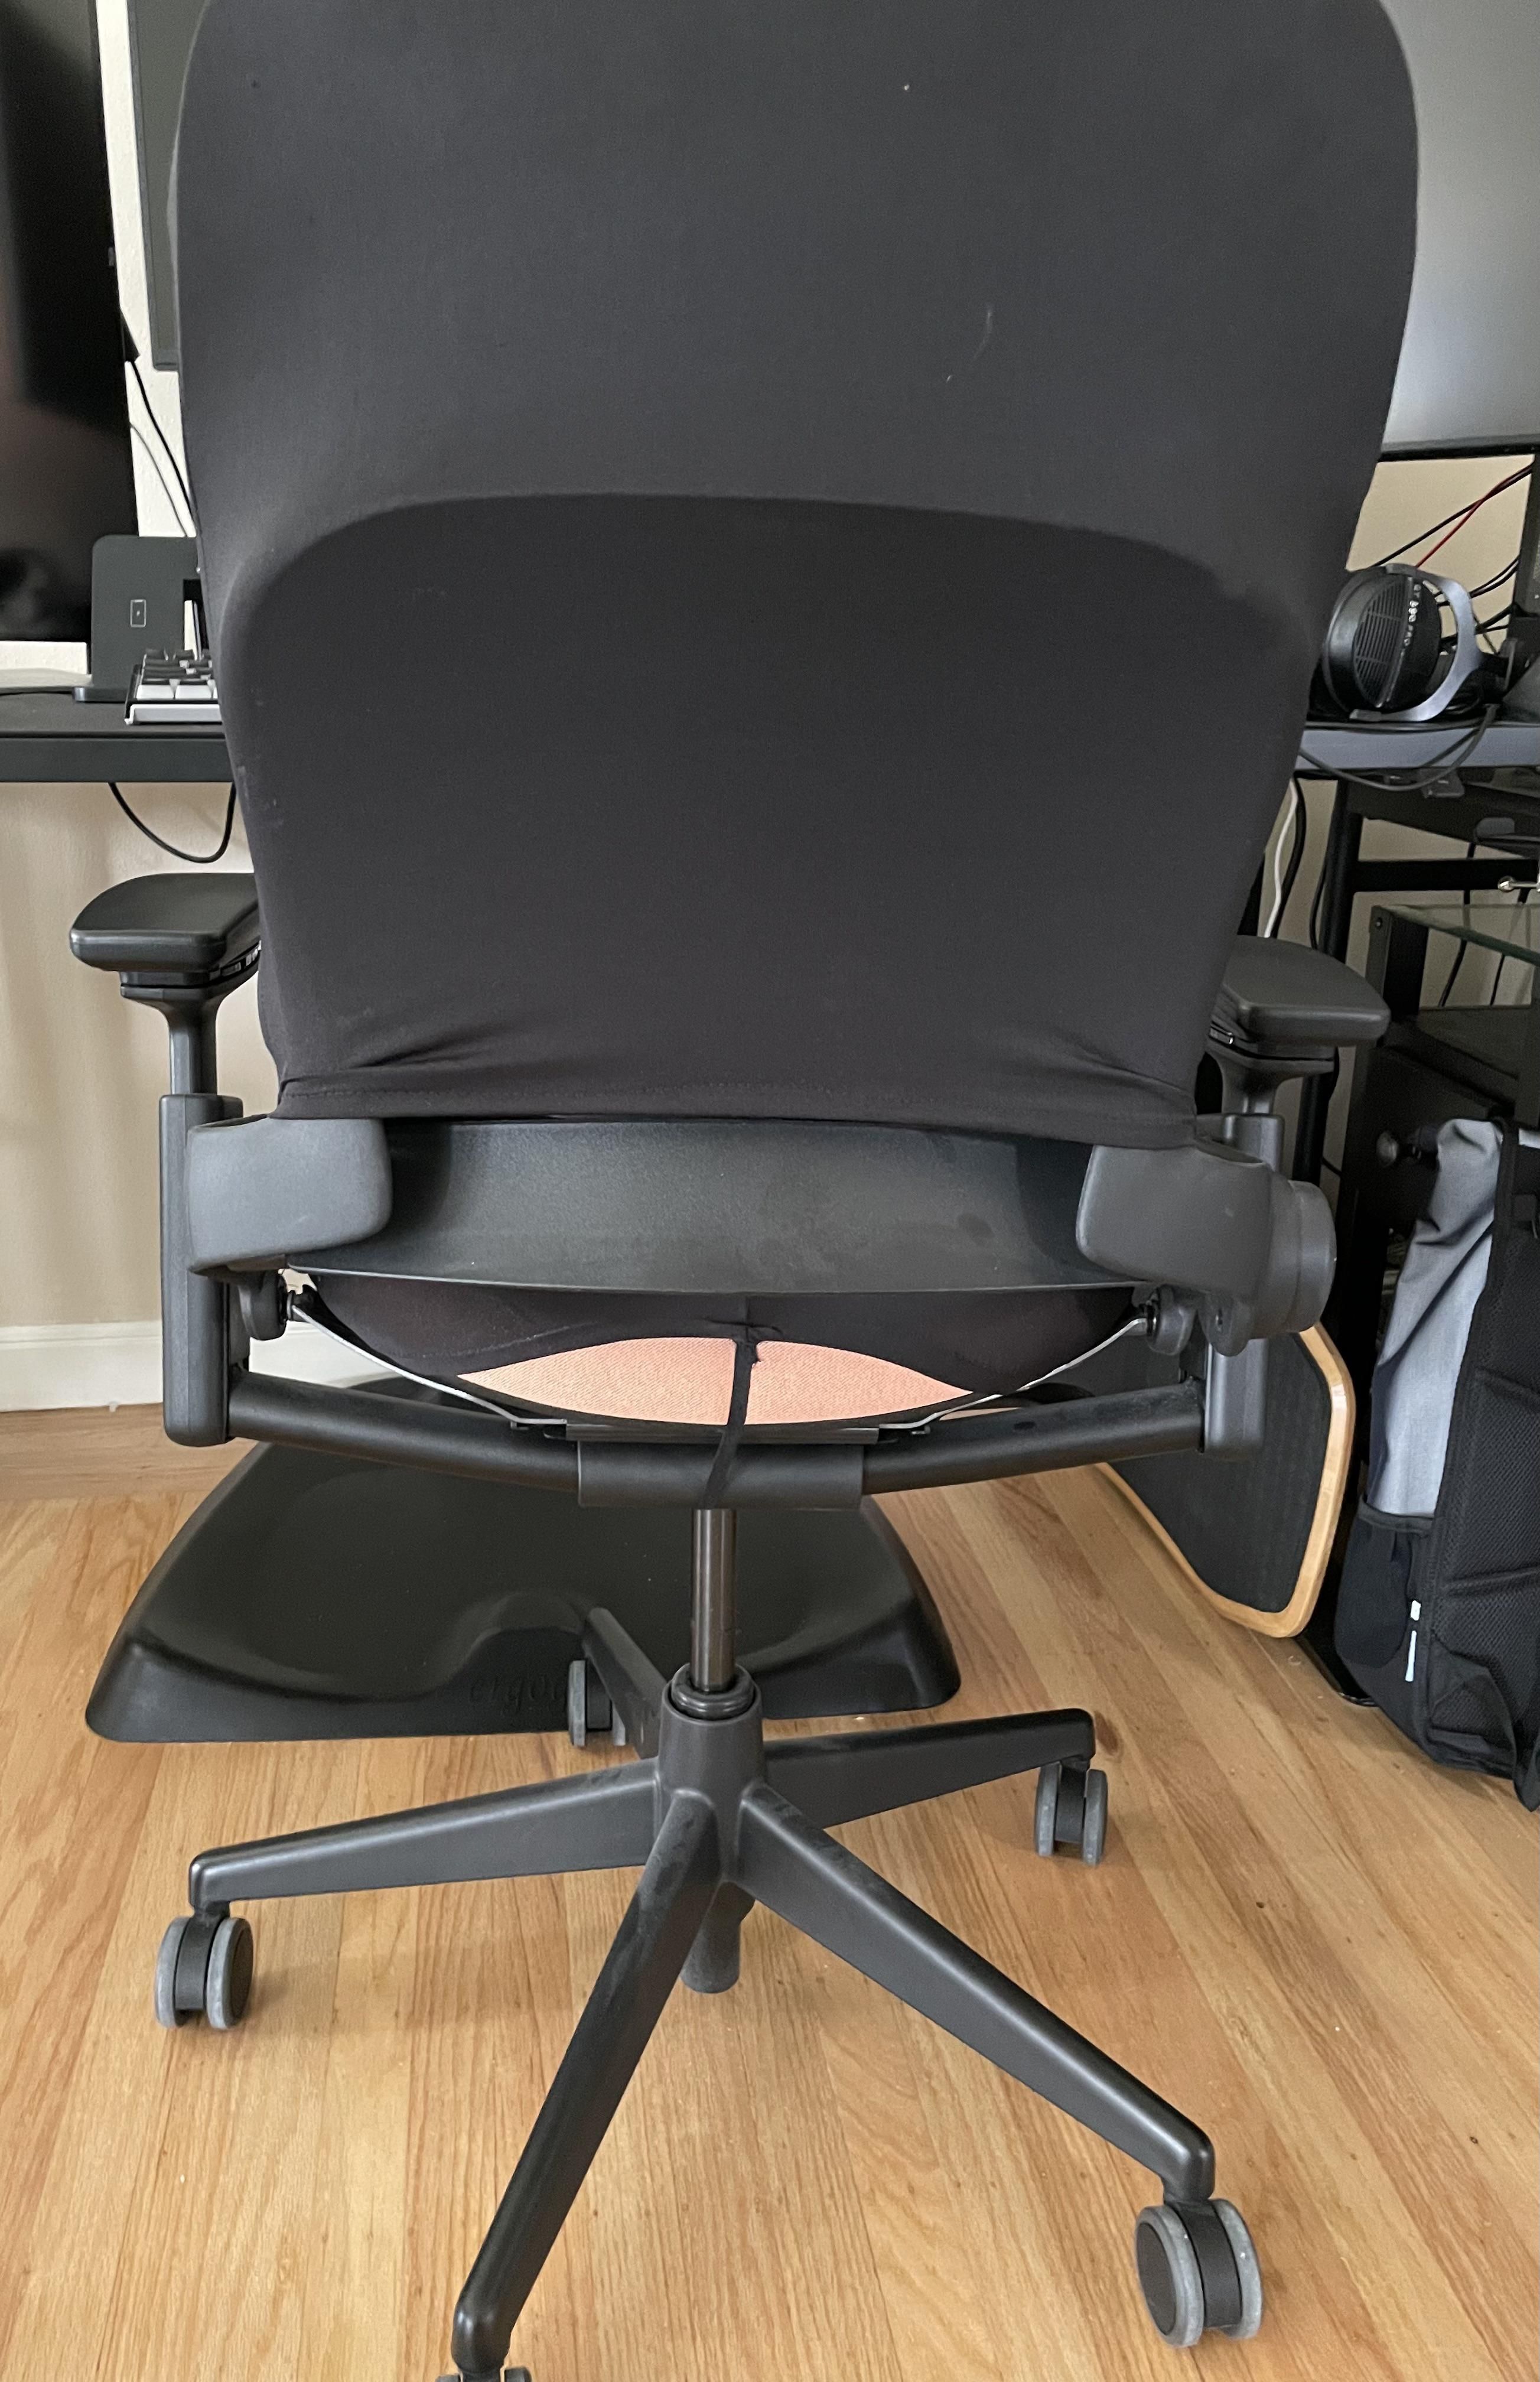 My husband got a free ergonomic chair, the downside being peach color fabric. He got black covers to go on it and accidentally gave himself perma plumbers crack..